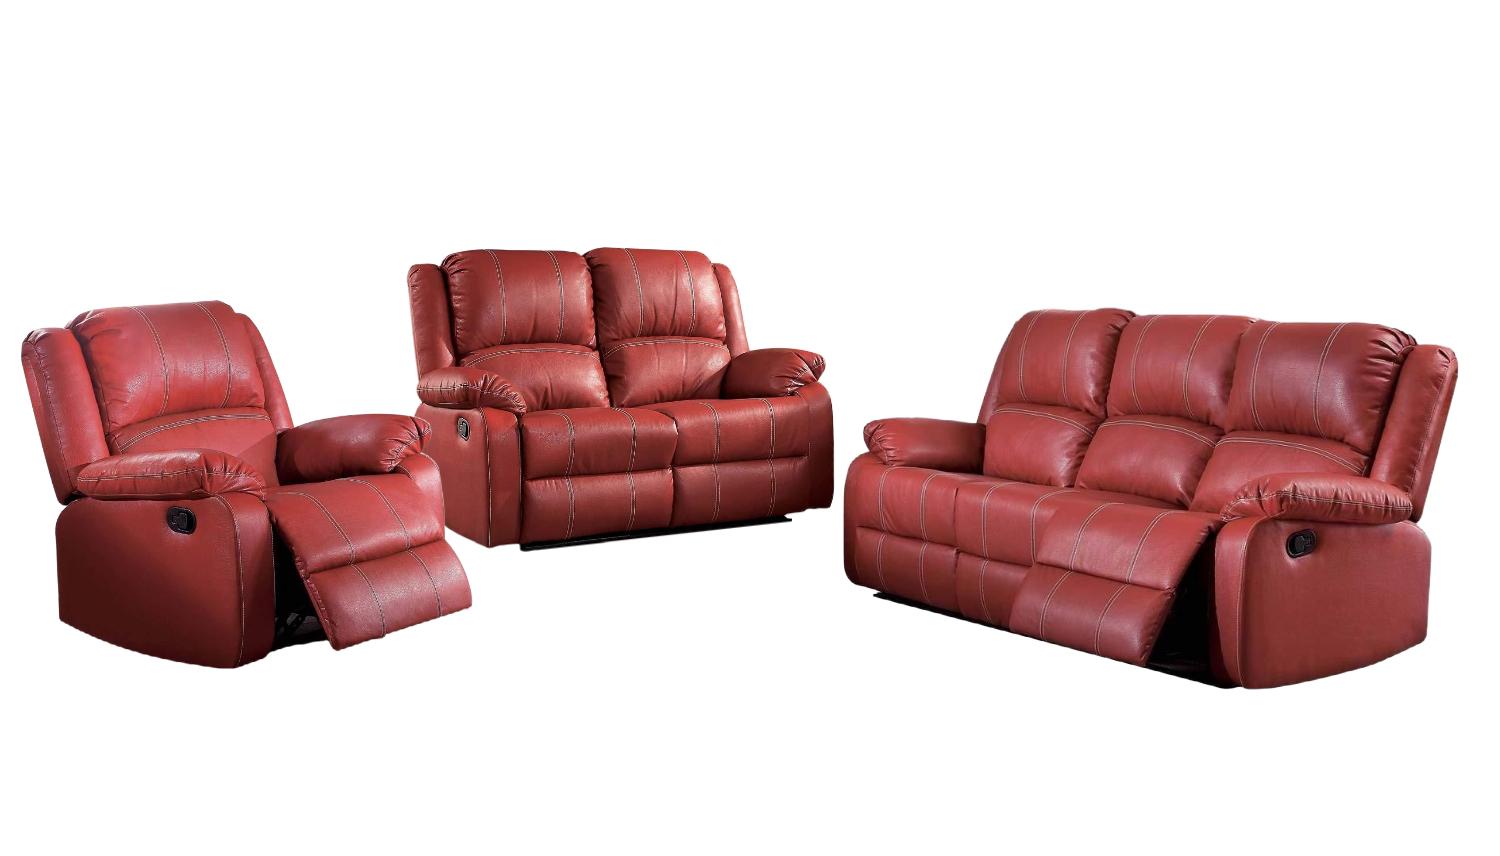 Modern Sofa Loveseat Recliner Zuriel 52150-3pcs in Red Faux Leather